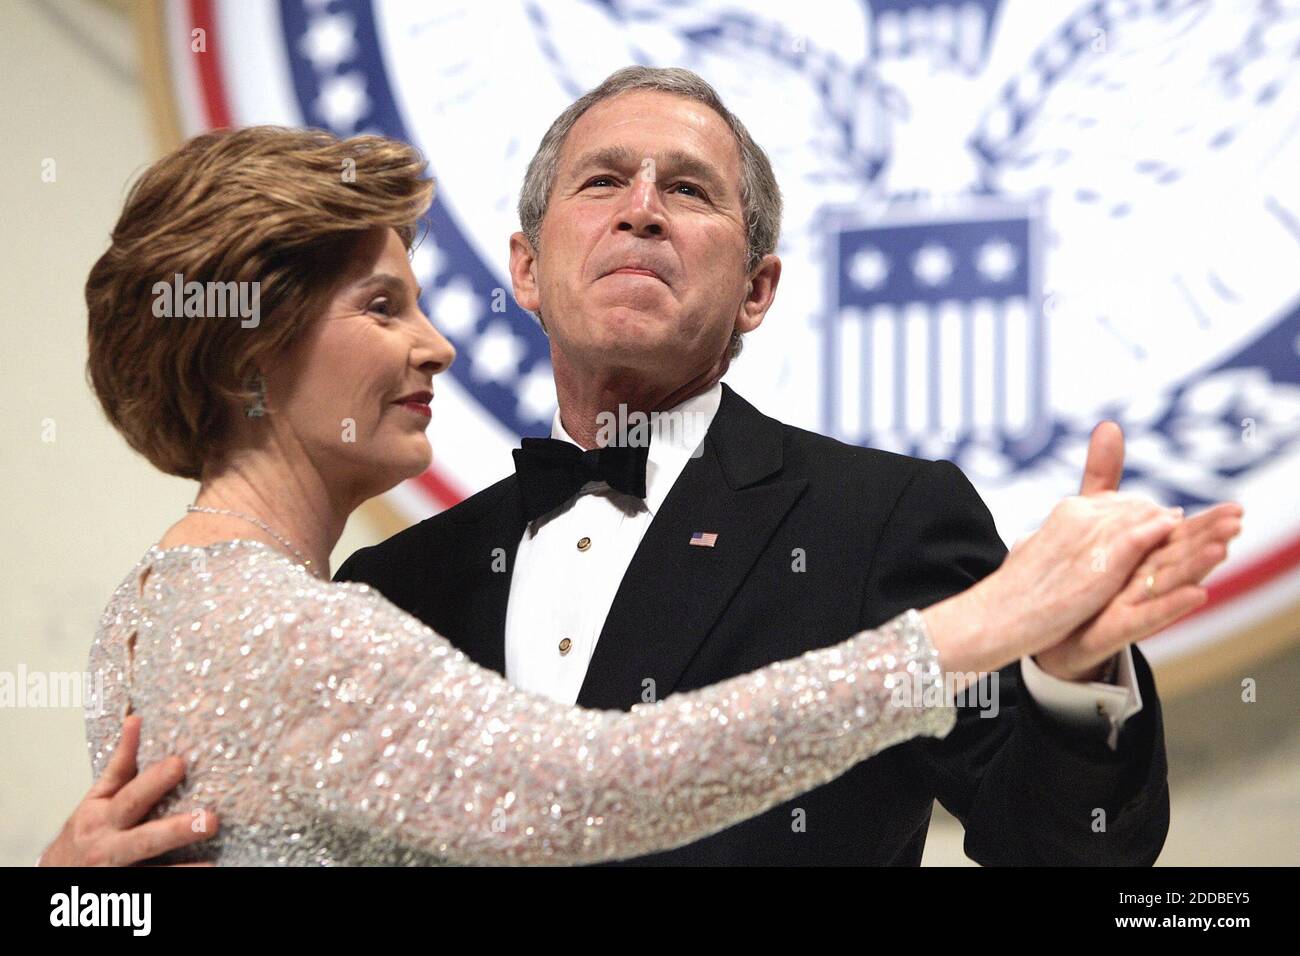 NO FILM, NO VIDEO, NO TV, NO DOCUMENTARY - President George W. Bush dances with first lady Laura Bush at the Patriot Ball at the Washington Convention Center in Washington, DC, USA, on January 20, 2005. Photo by Chuck Kennedy/US News Story Slugged/KRT/ABACA. Stock Photo